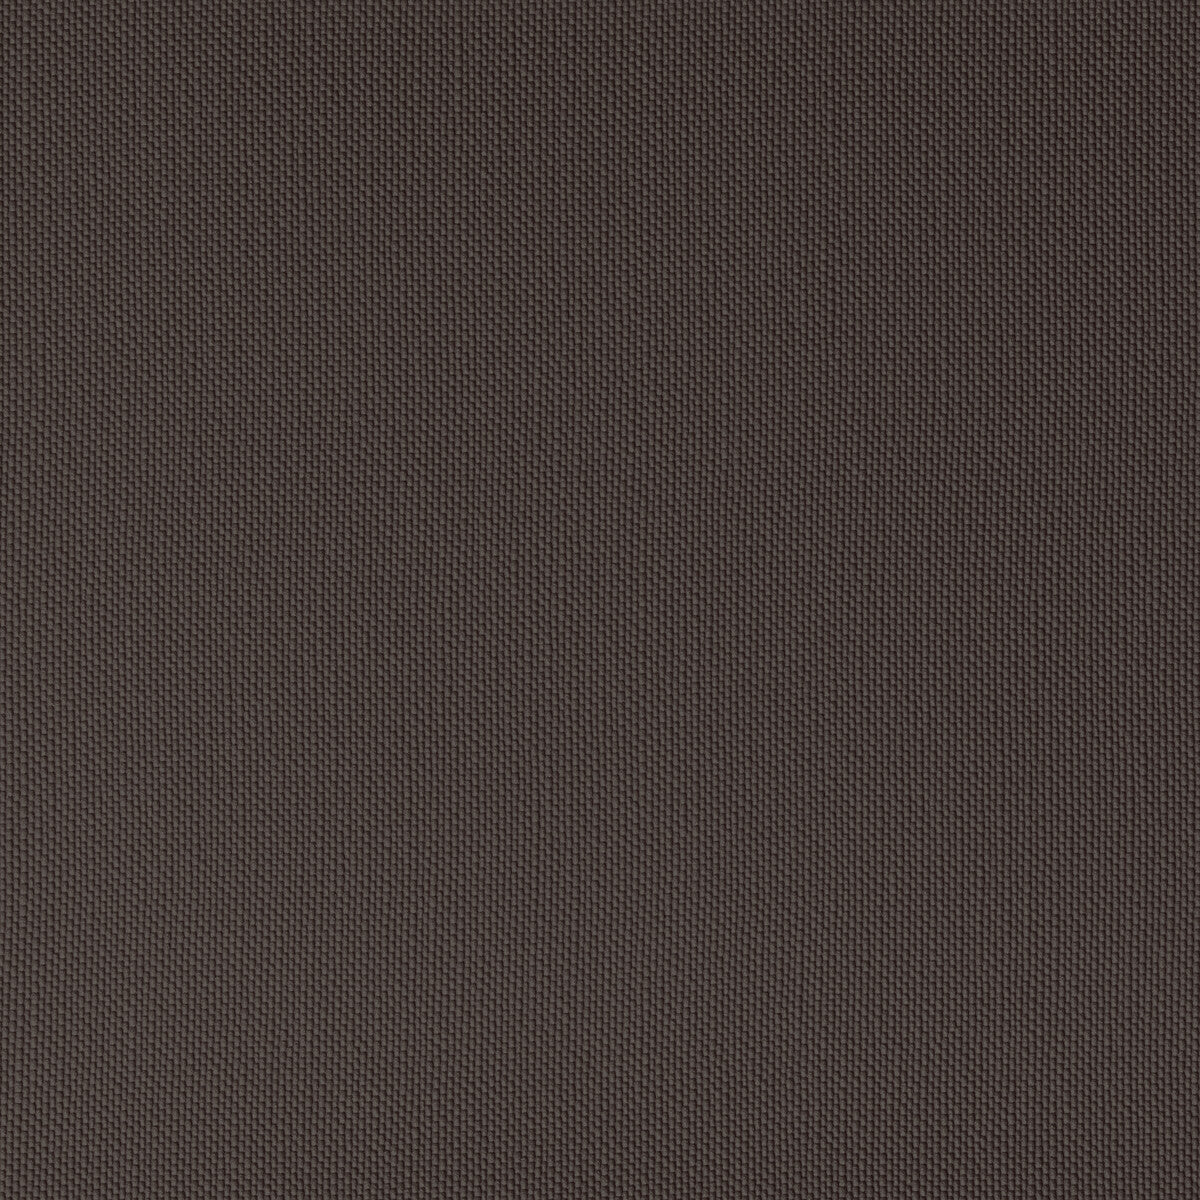 Ventura fabric in cocoa color - pattern VENTURA.6.0 - by Kravet Contract in the Foundations / Value collection